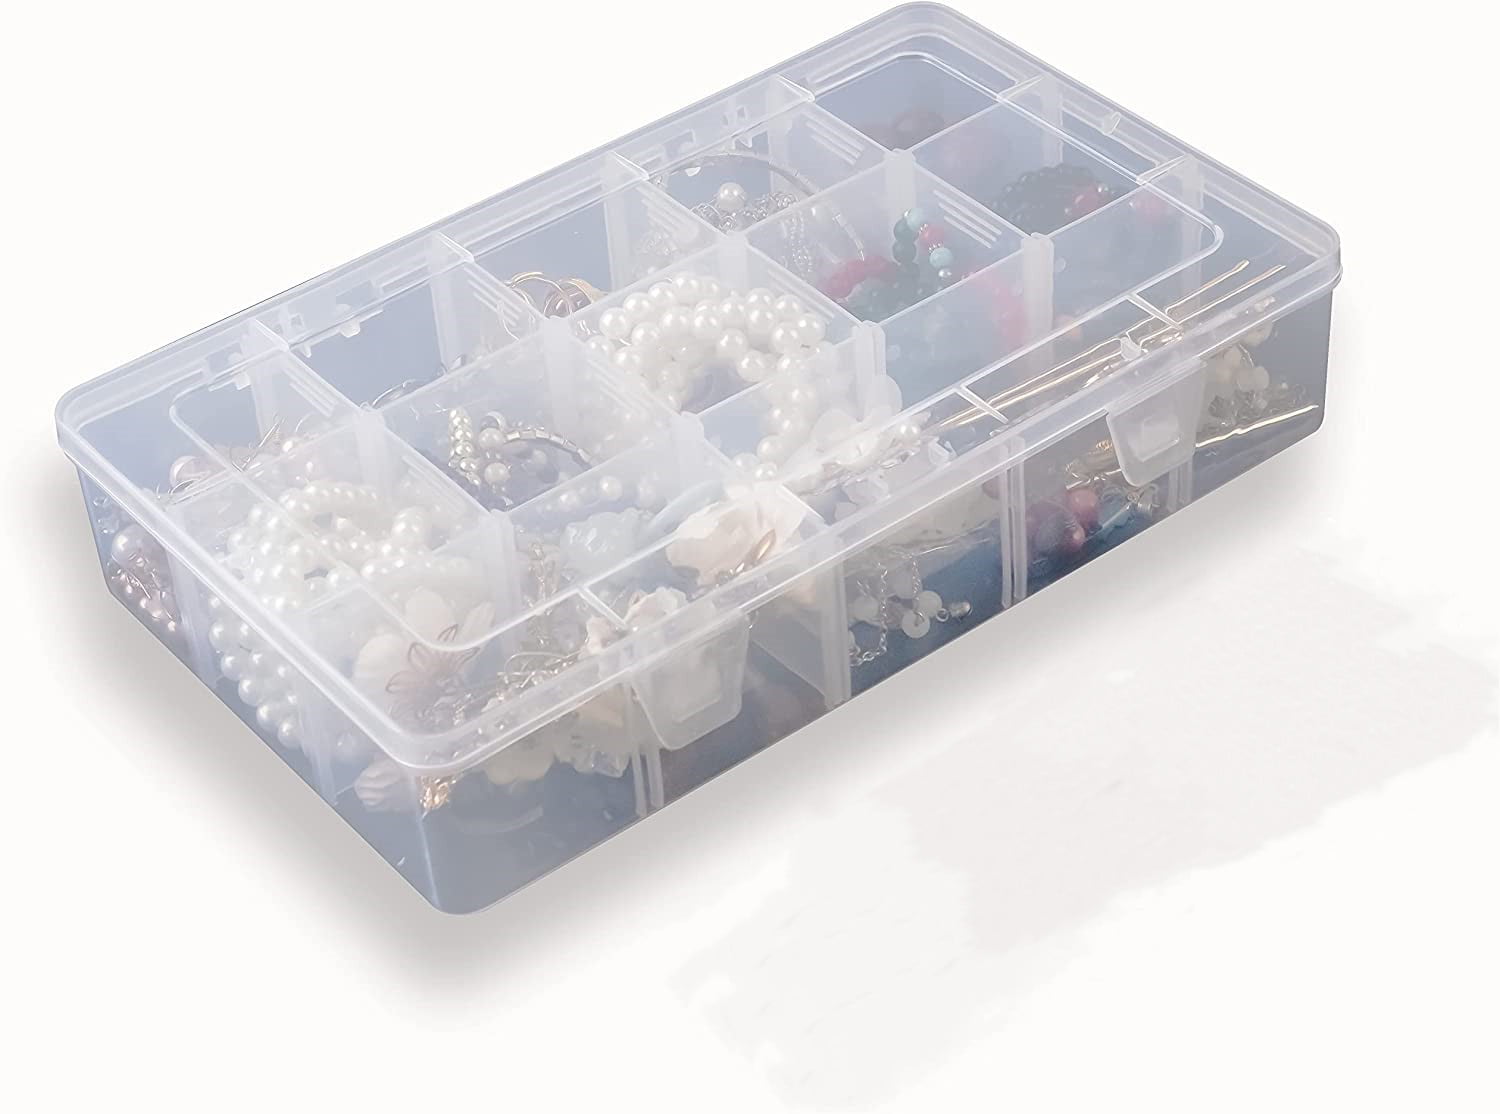 Menkxi 24 Pcs Plastic Organizer Box with Fixed Dividers 24 Grids Small  Clear Storage Organizer Reusable Jewelry Bead Organizer Tackle Box  Container